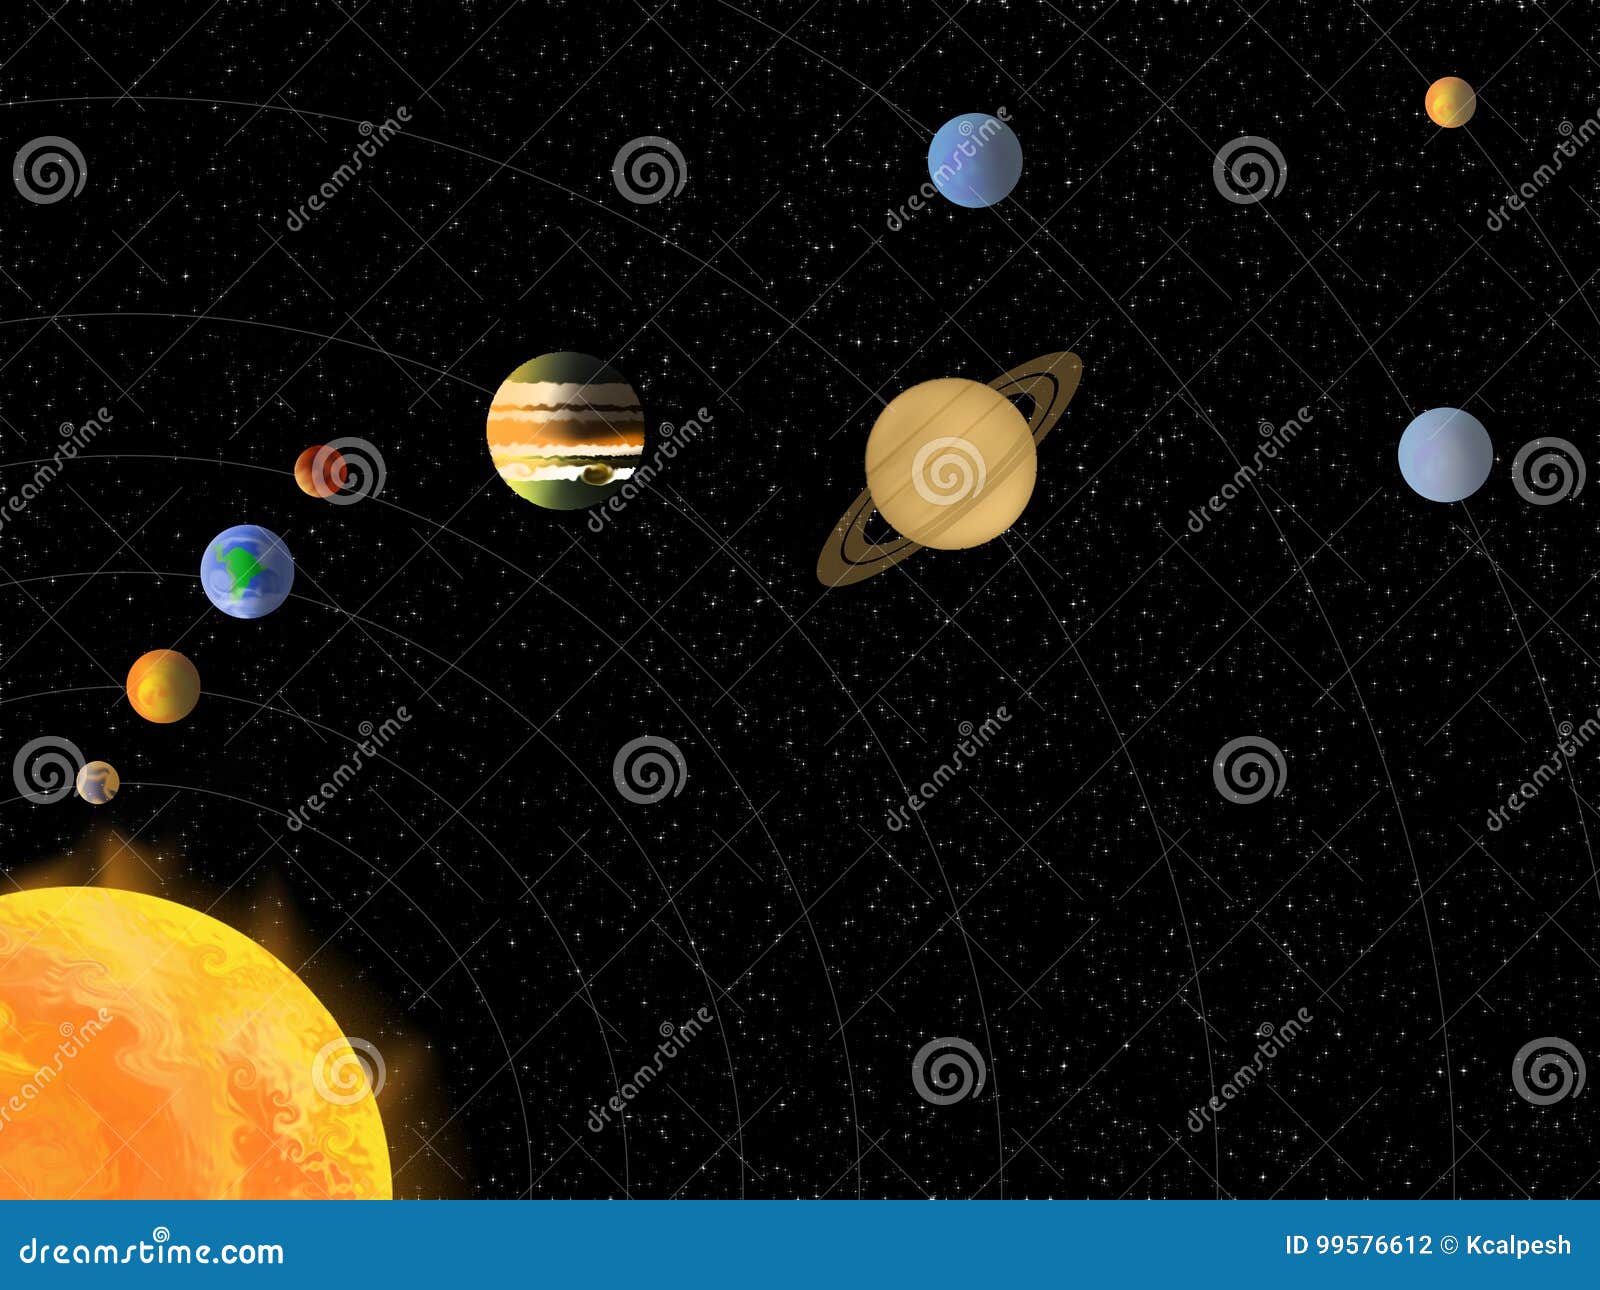 Solar System Without Names Of Planets Stock Illustration